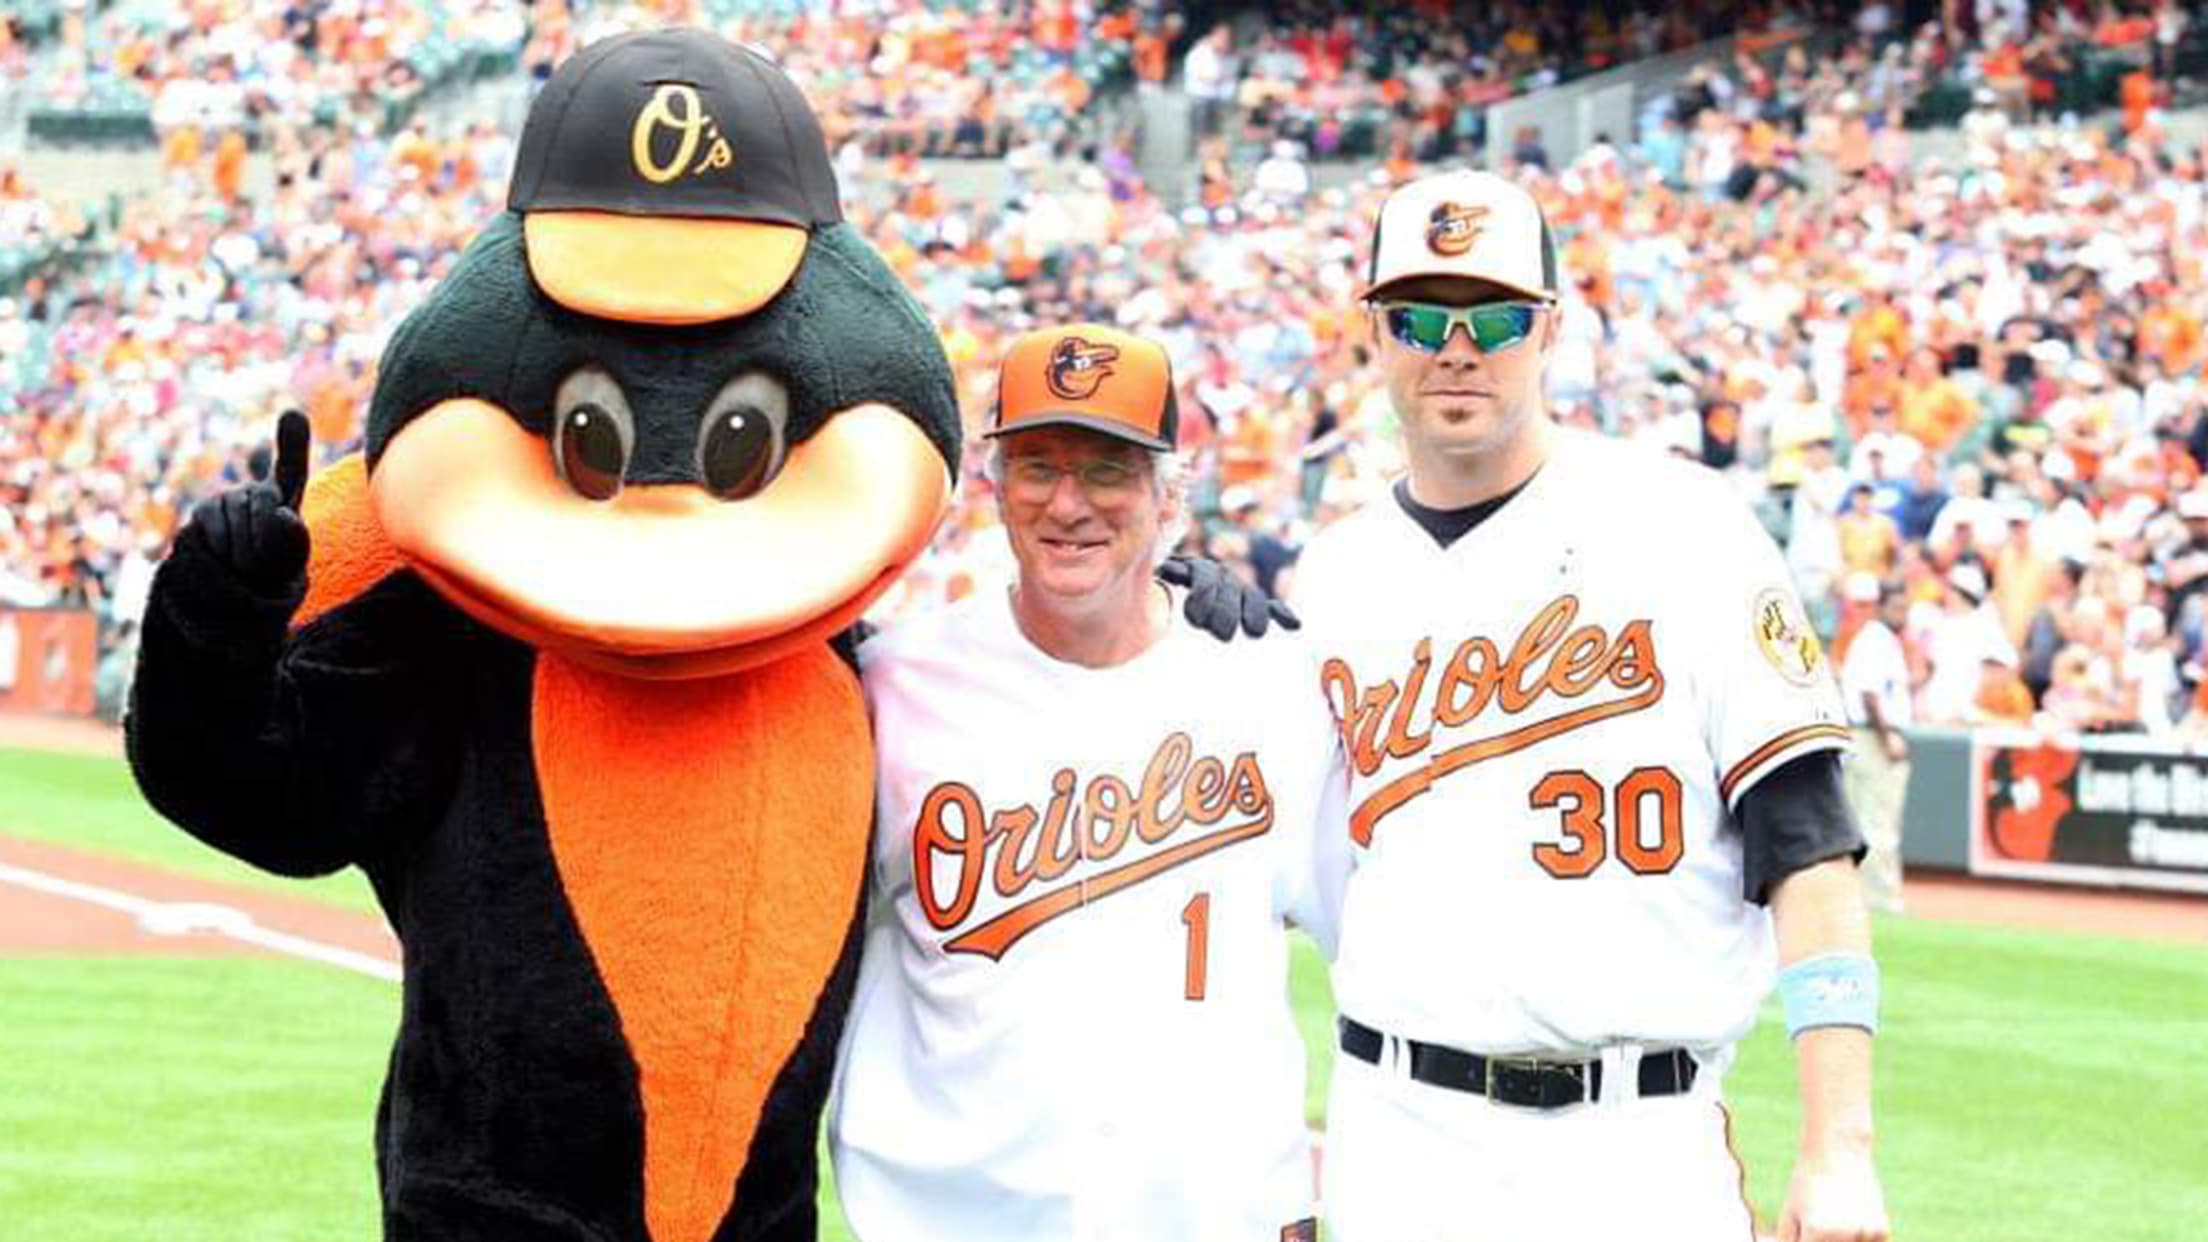 Orioles' Mascot Is MLB's 5th Best, According To Fan Survey - CBS